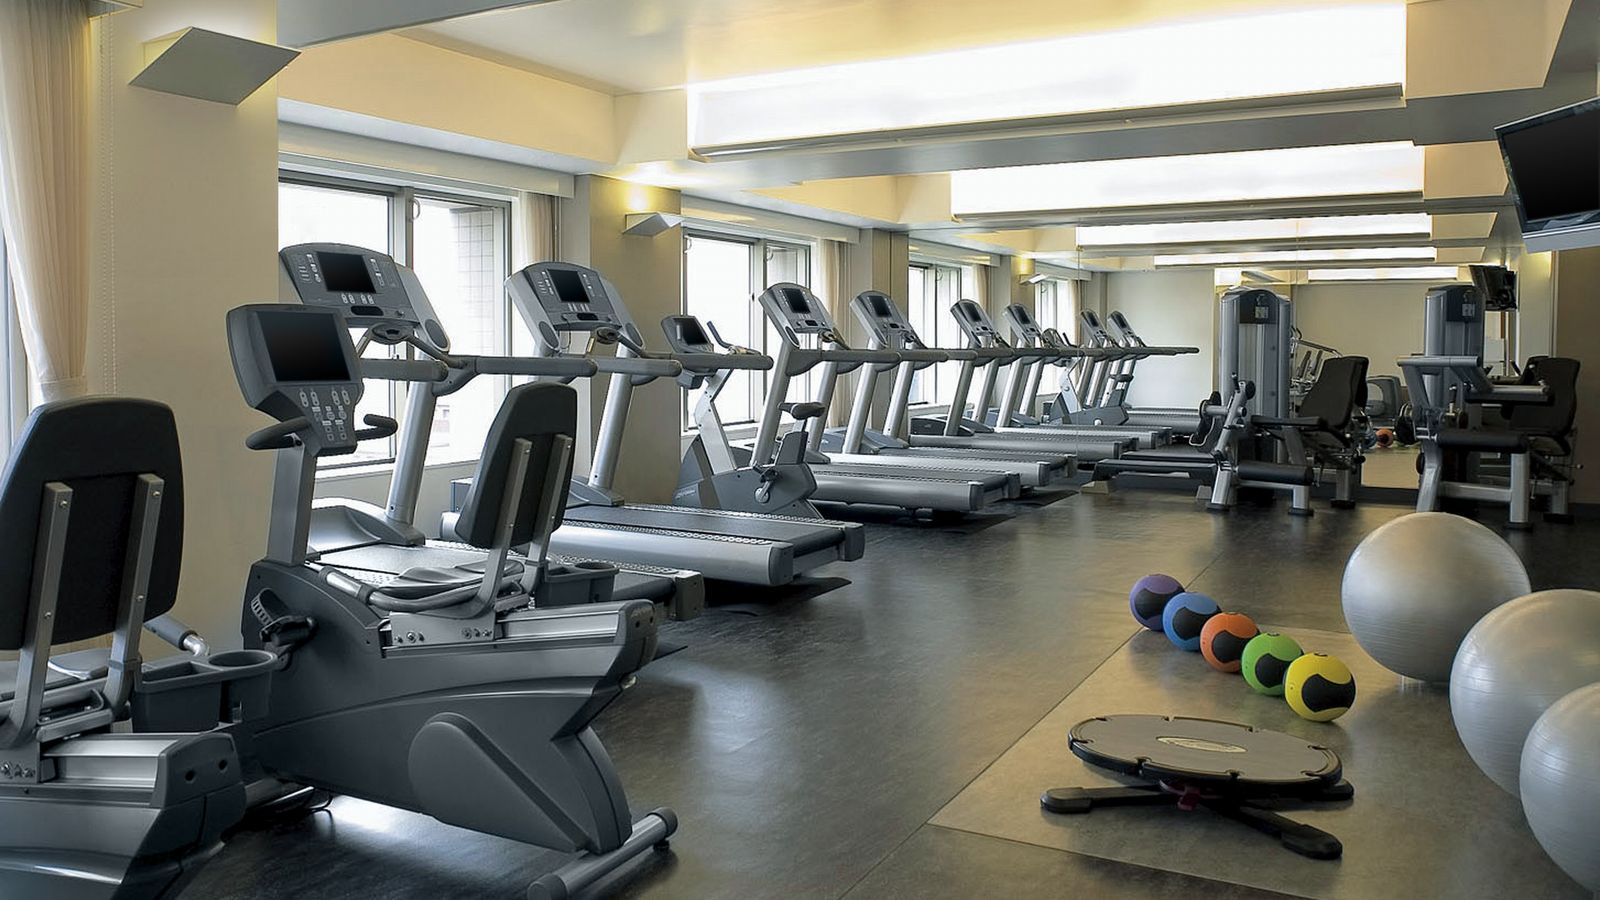 15 Minute Westin Workout Room for Gym